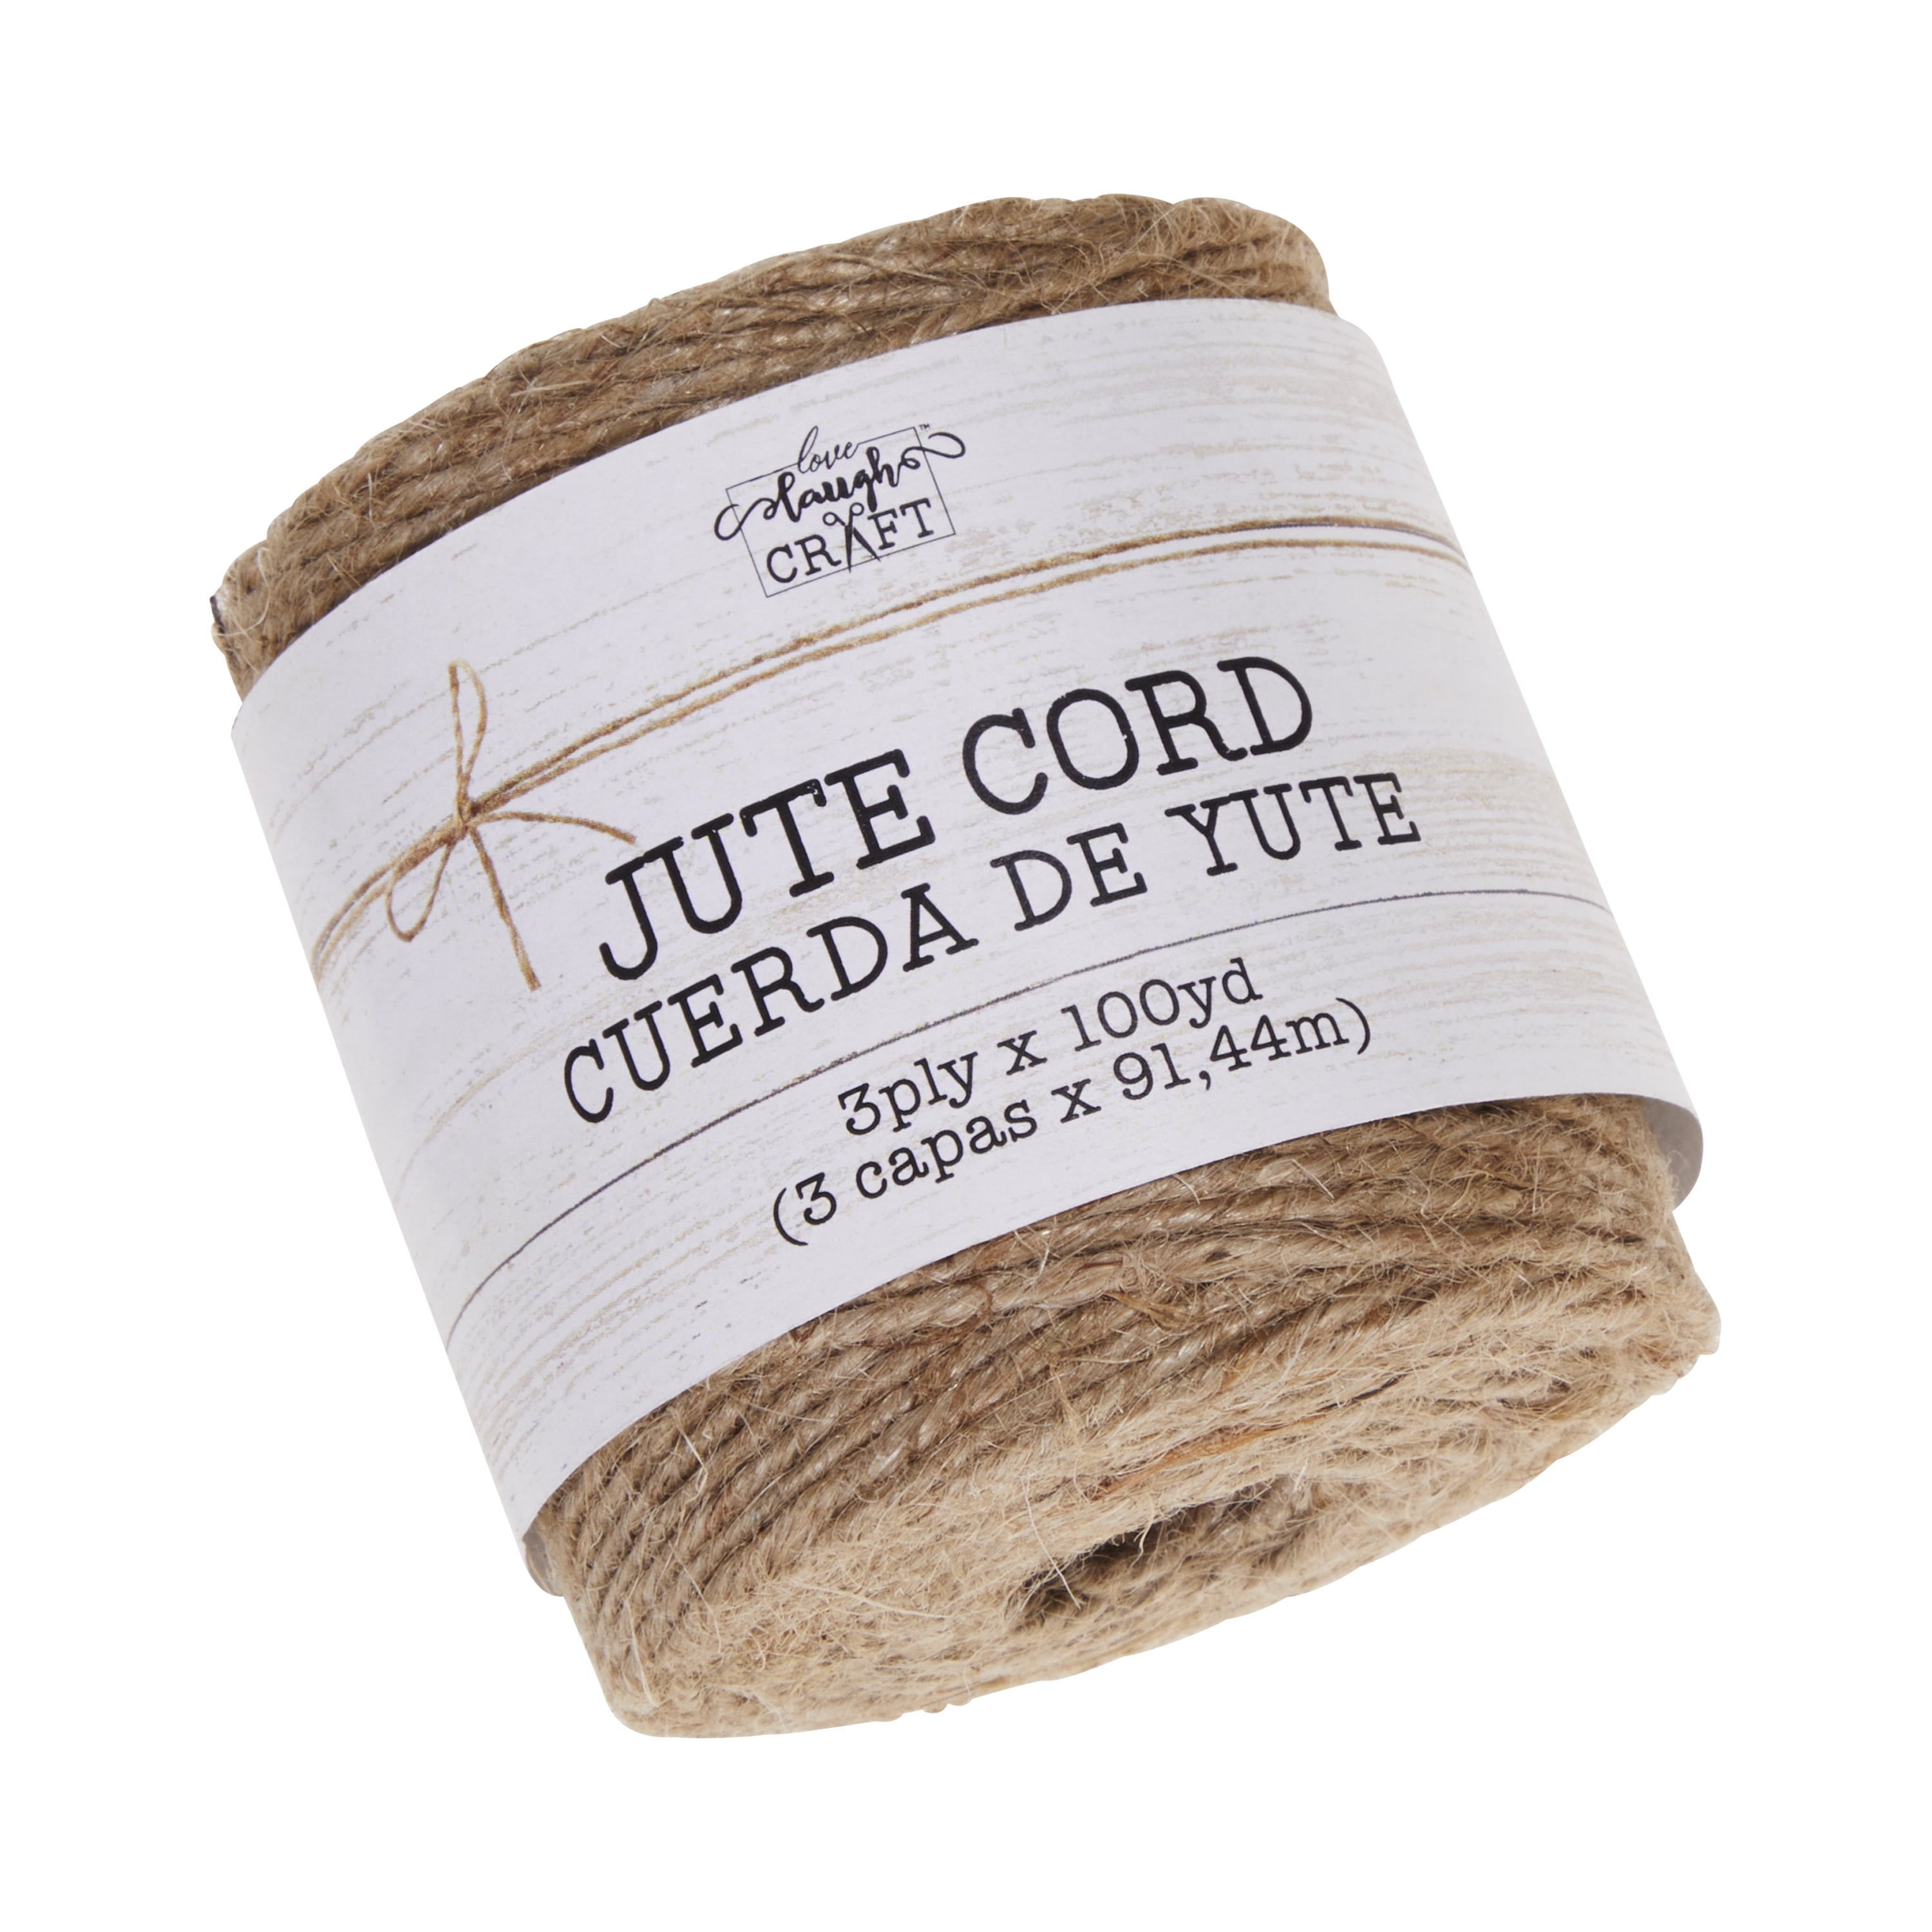 Love, Laugh, Craft 3-Ply Flexible Jute Cord Twine, 100-Yds